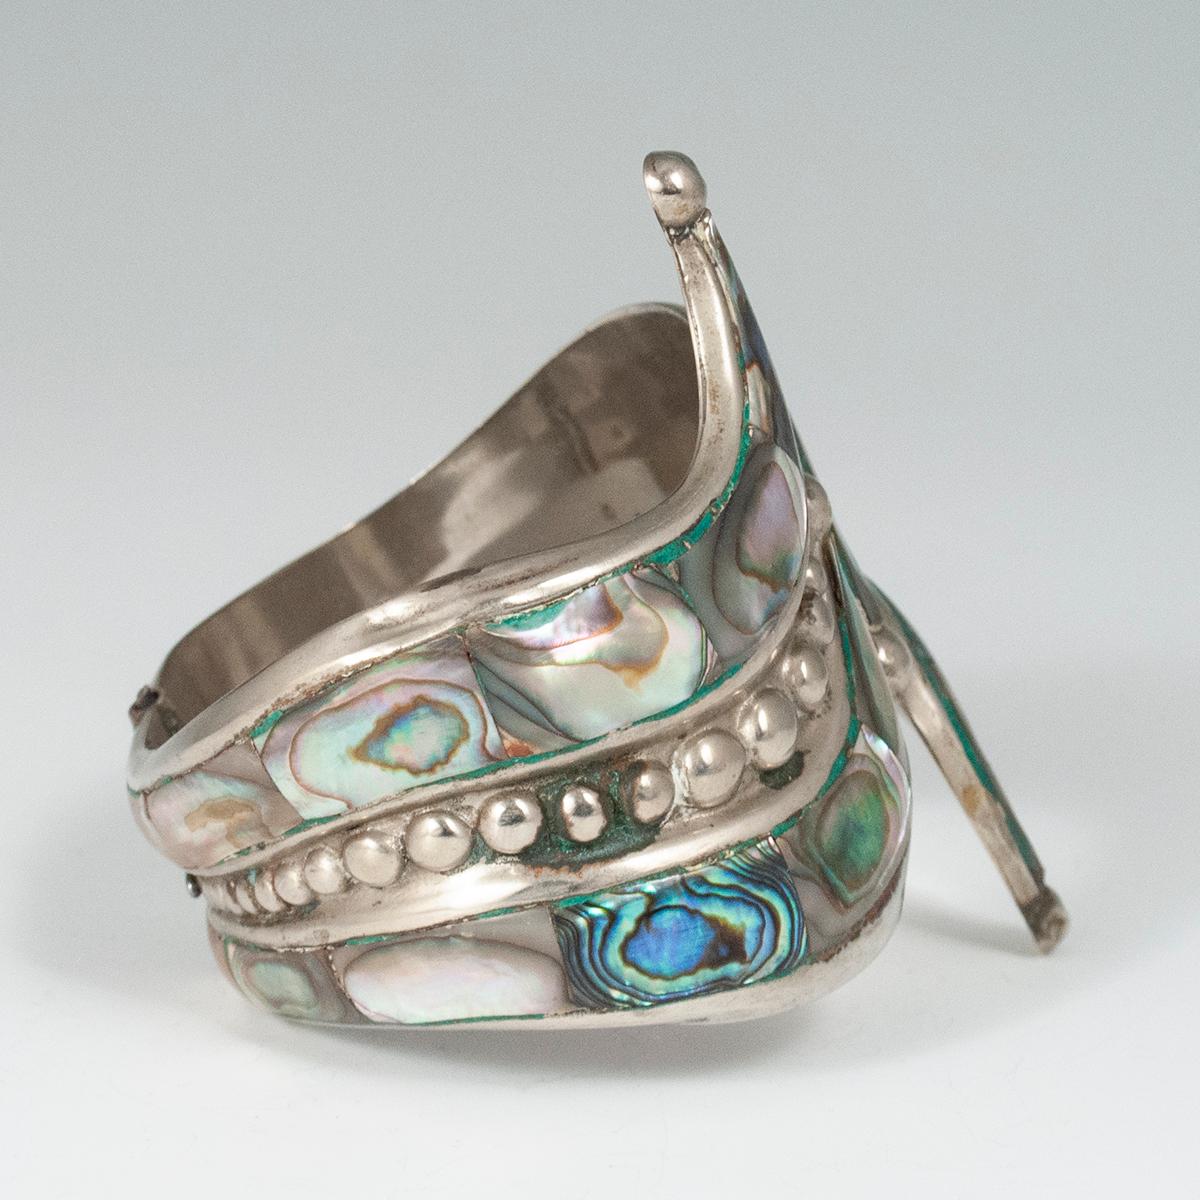 Bohemian 1980s Abalone and Silver Clamper Bracelet, Taxco, Mexico